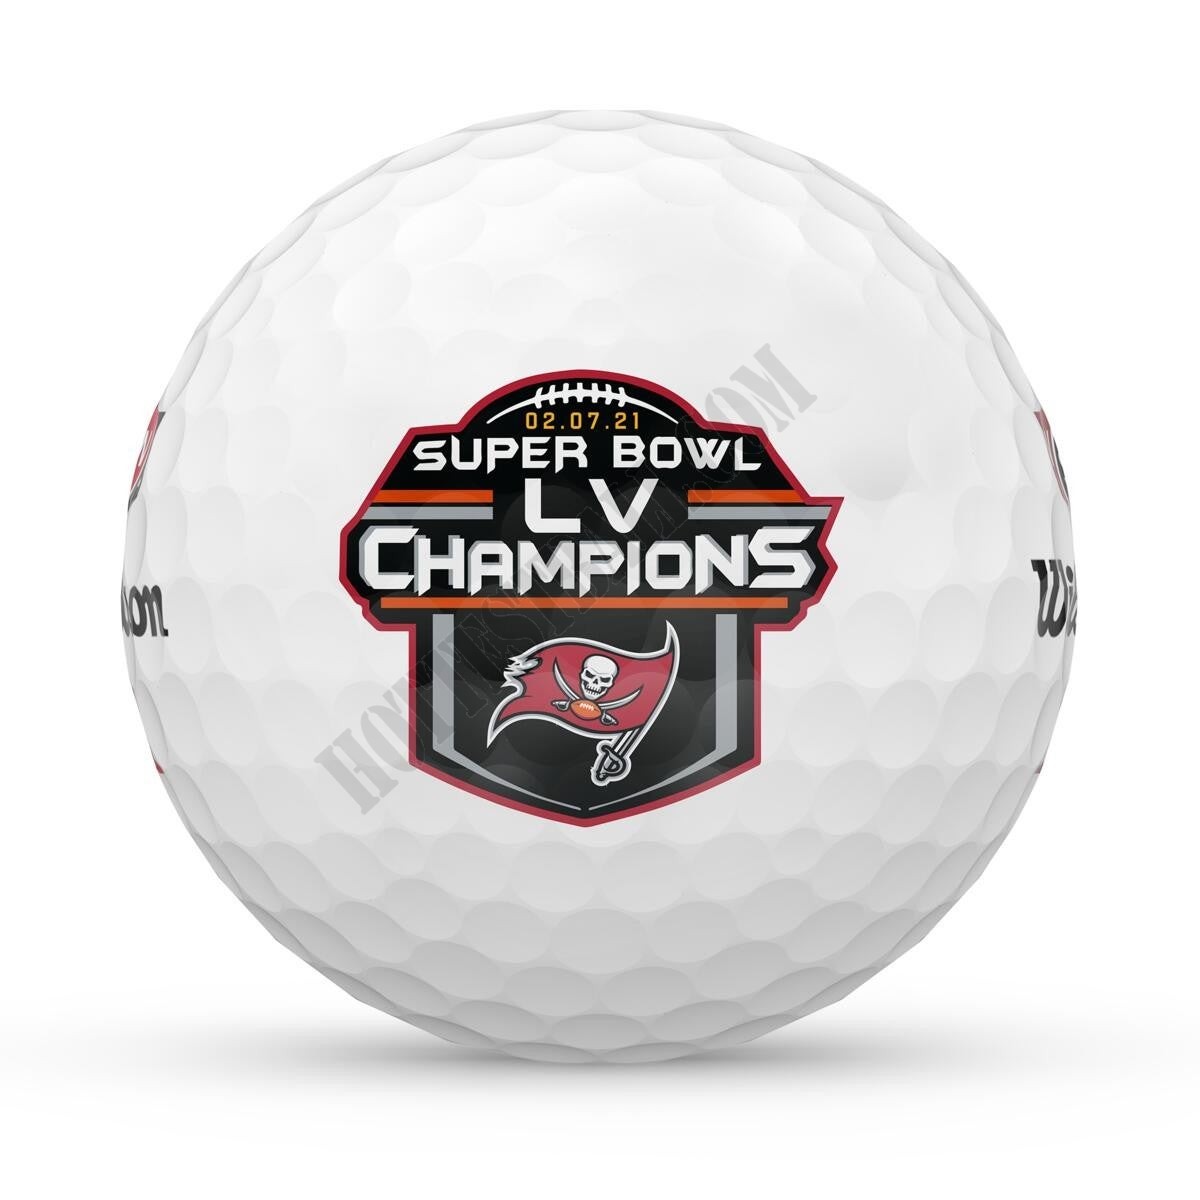 Tampa Bay Buccaneers - DUO Soft+ Super Bowl Championship Golf Balls (12-pack) ● Wilson Promotions - Tampa Bay Buccaneers - DUO Soft+ Super Bowl Championship Golf Balls (12-pack) ● Wilson Promotions